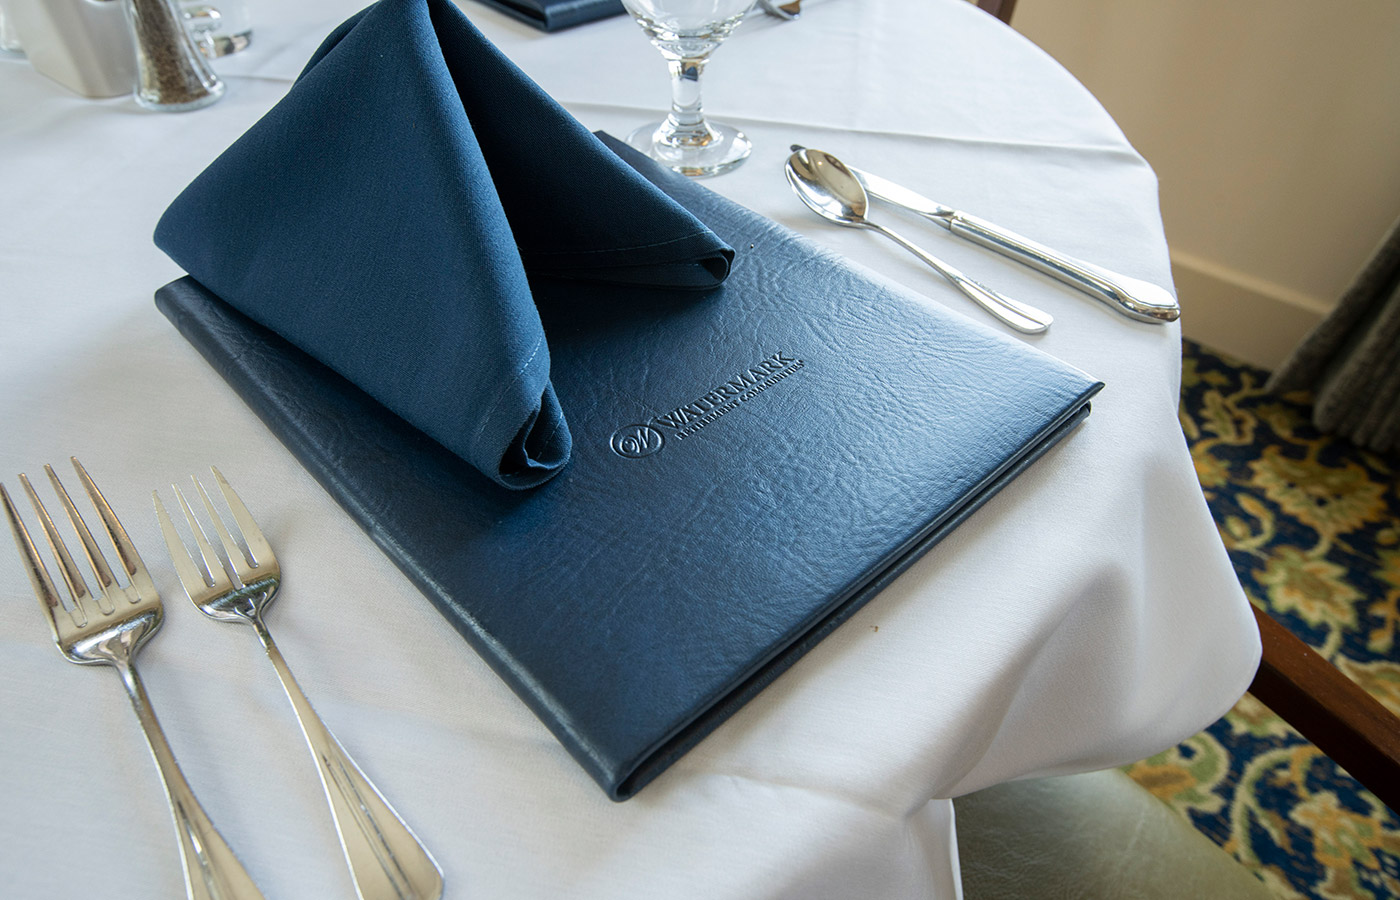 A place setting in the dining area at The Watermark at San Ramon.